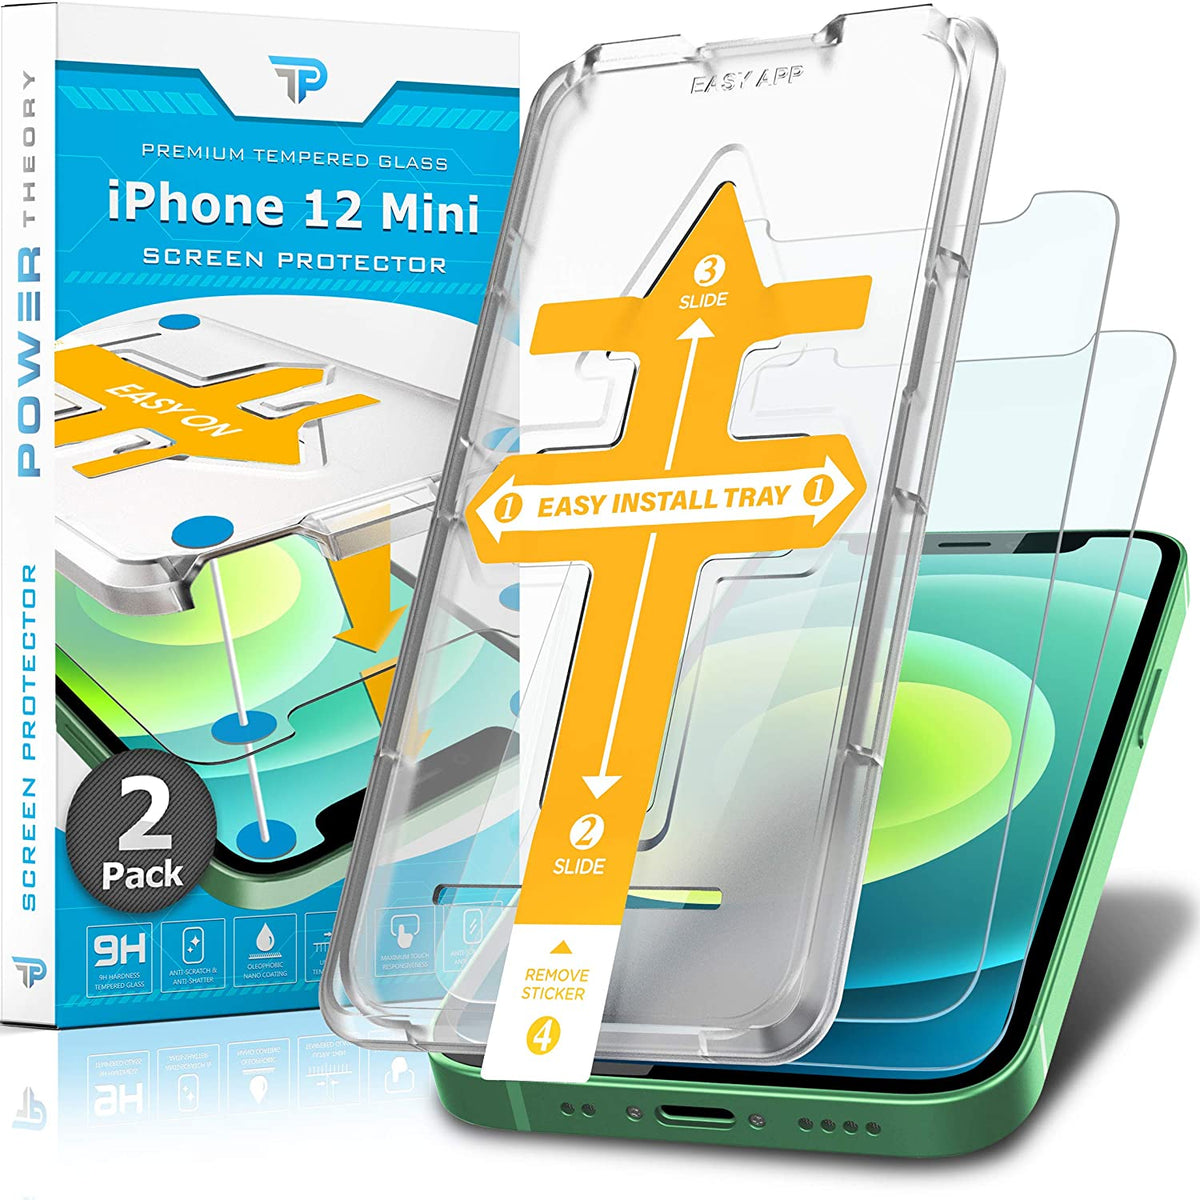 iPhone 12 Mini Tempered Glass Screen Protector [2-Pack] Cover